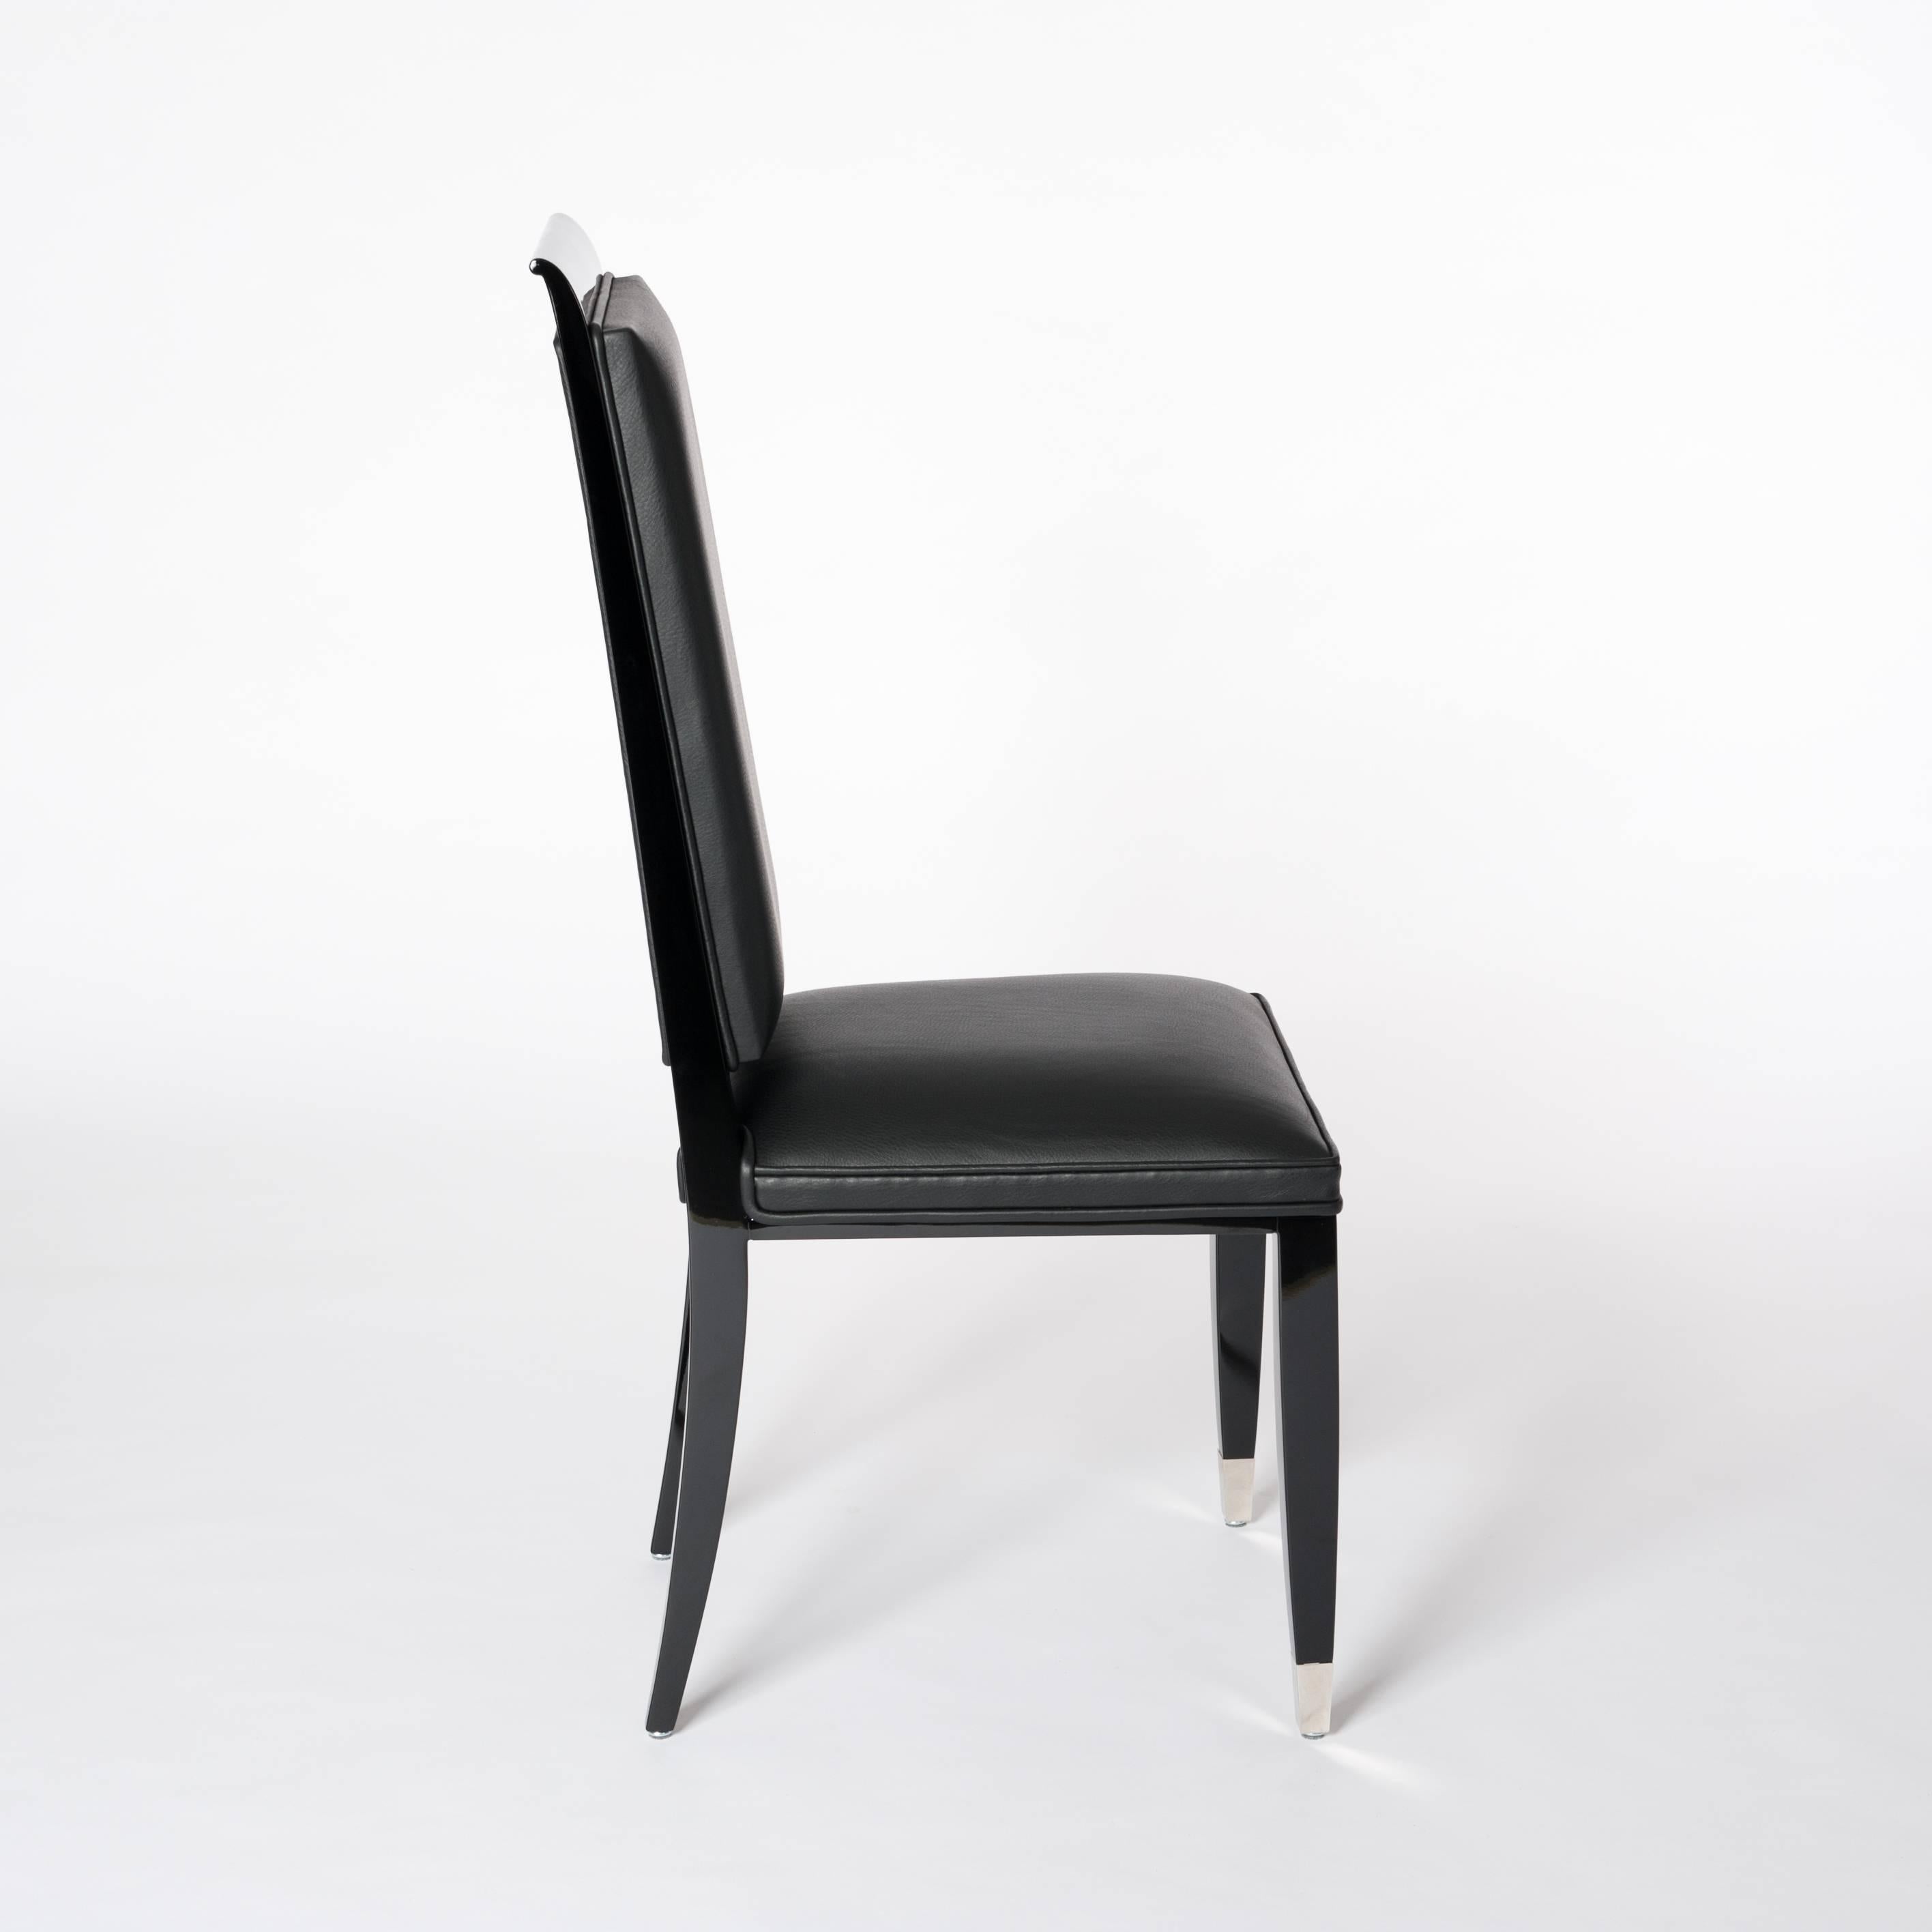 Four French Black Lacquered Art Deco Dining Room Chairs with High Backrest (Französisch)